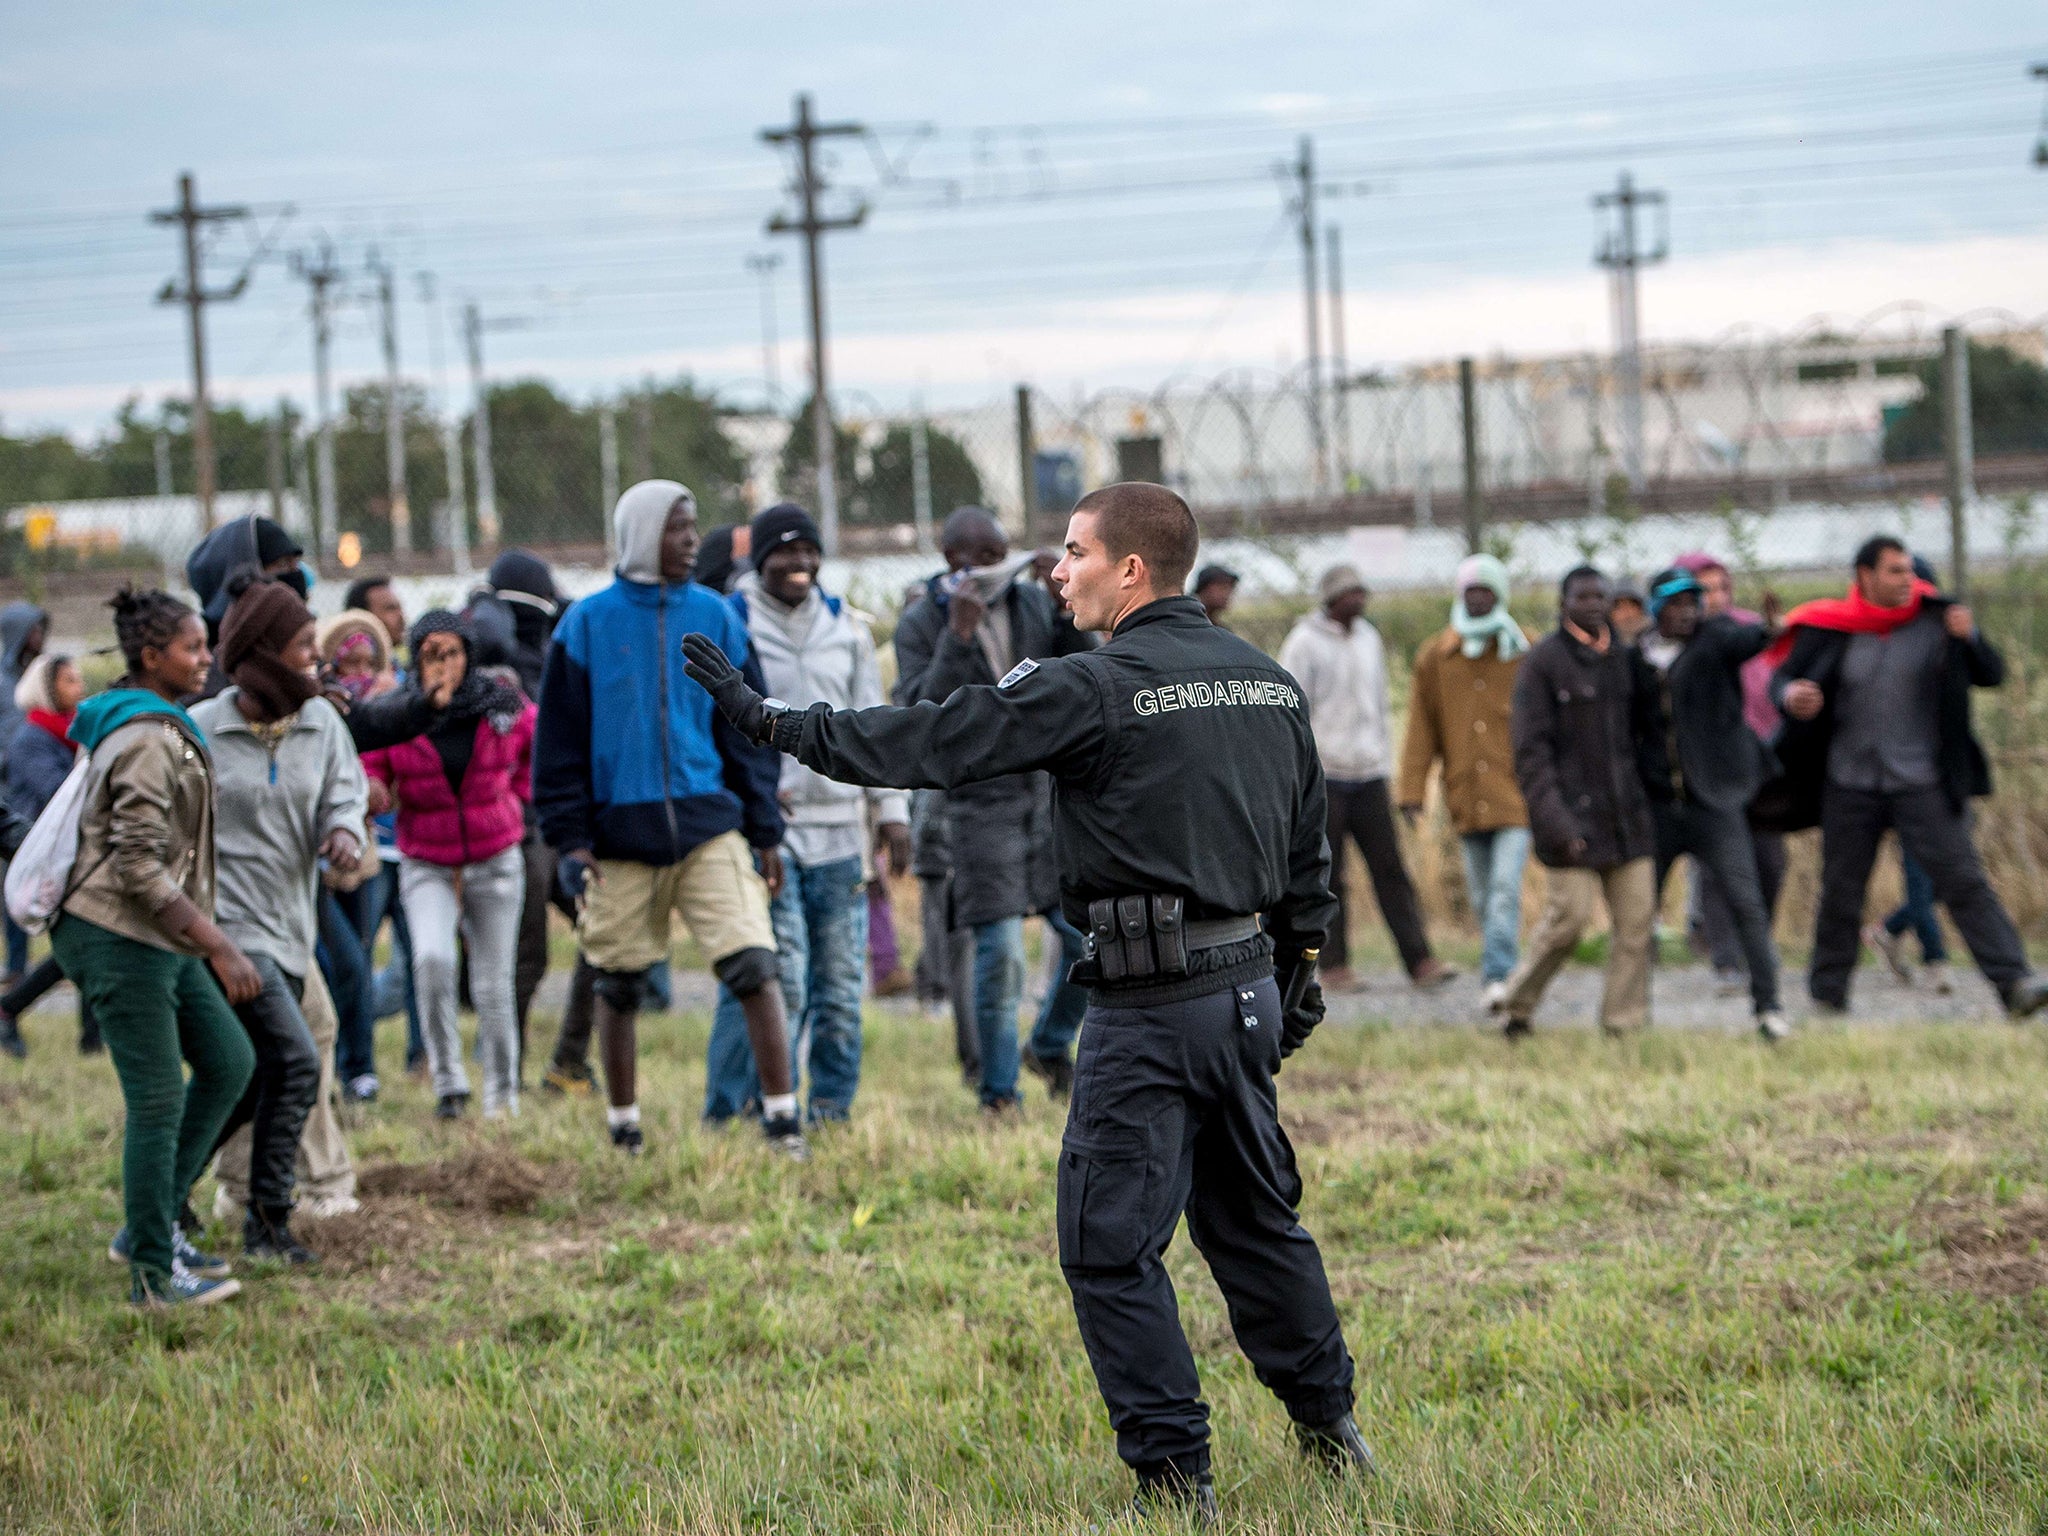 A policeman faces migrants trying to reach the Channel Tunnel operated by Eurotunnel in Coquelles near Calais (Image: Getty)